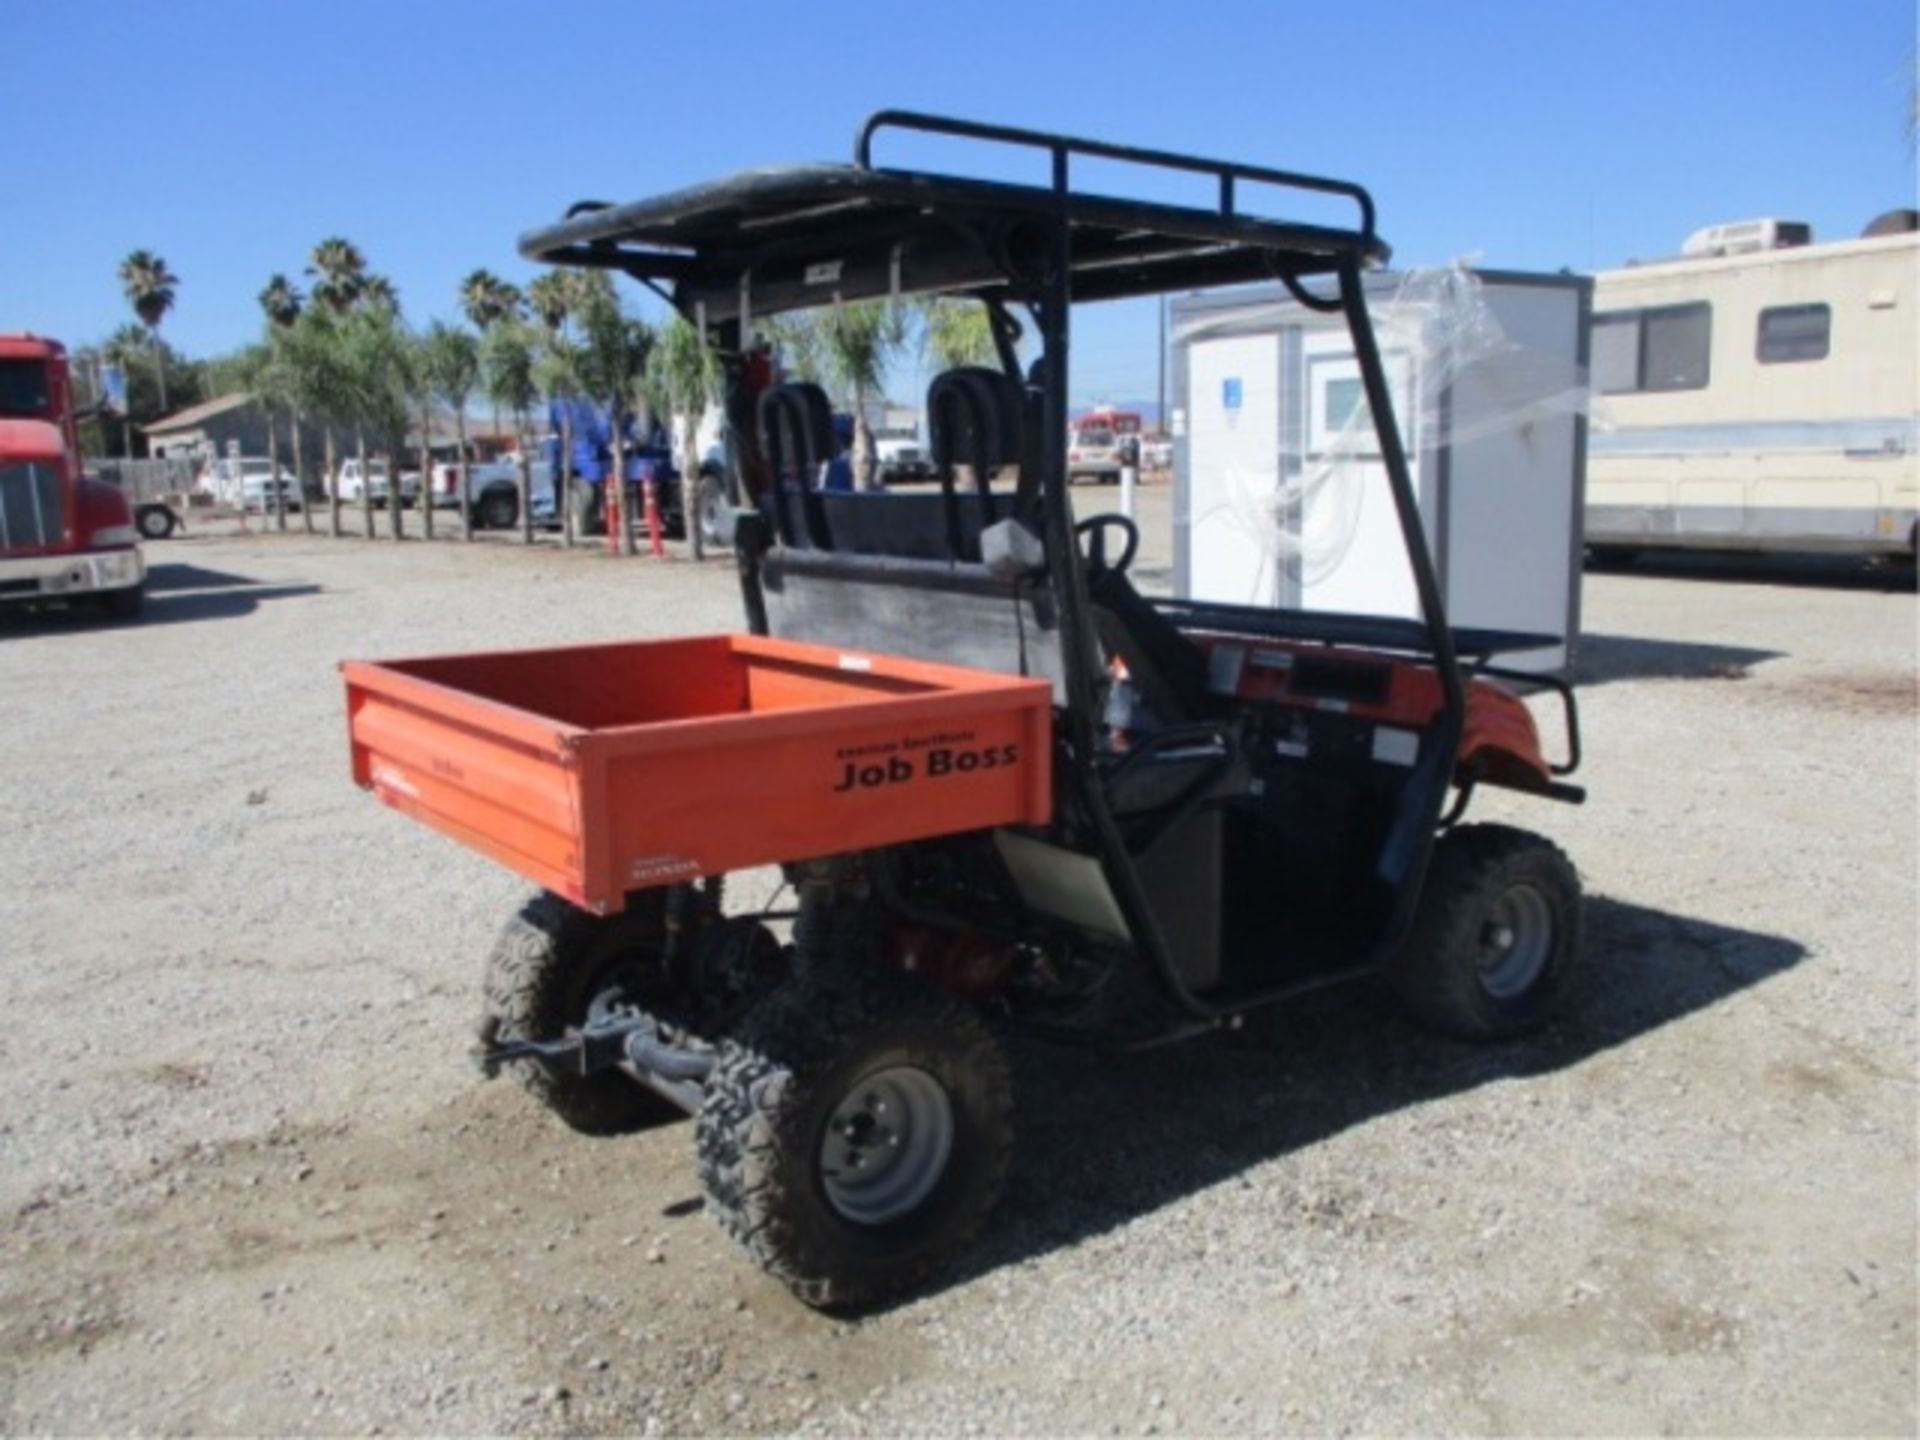 2008 American Sportworks Job Boss Utility Cart, Honda Gas, Rear Metal Dump Bed, Canopy, Tow Hitch, - Image 13 of 50